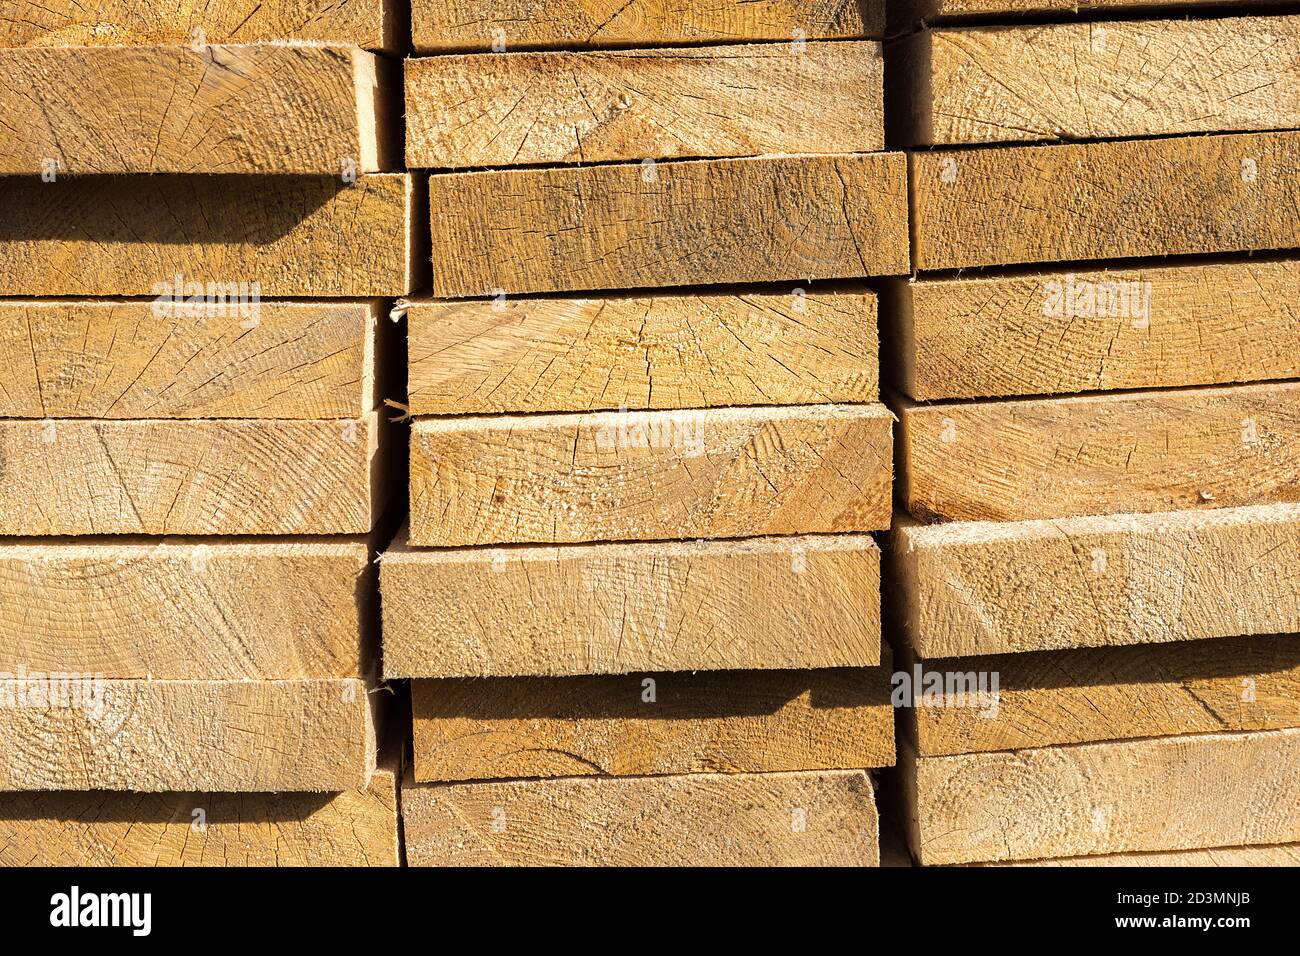 Wooden boards are stored outdoors. Wood texture Stock Photo